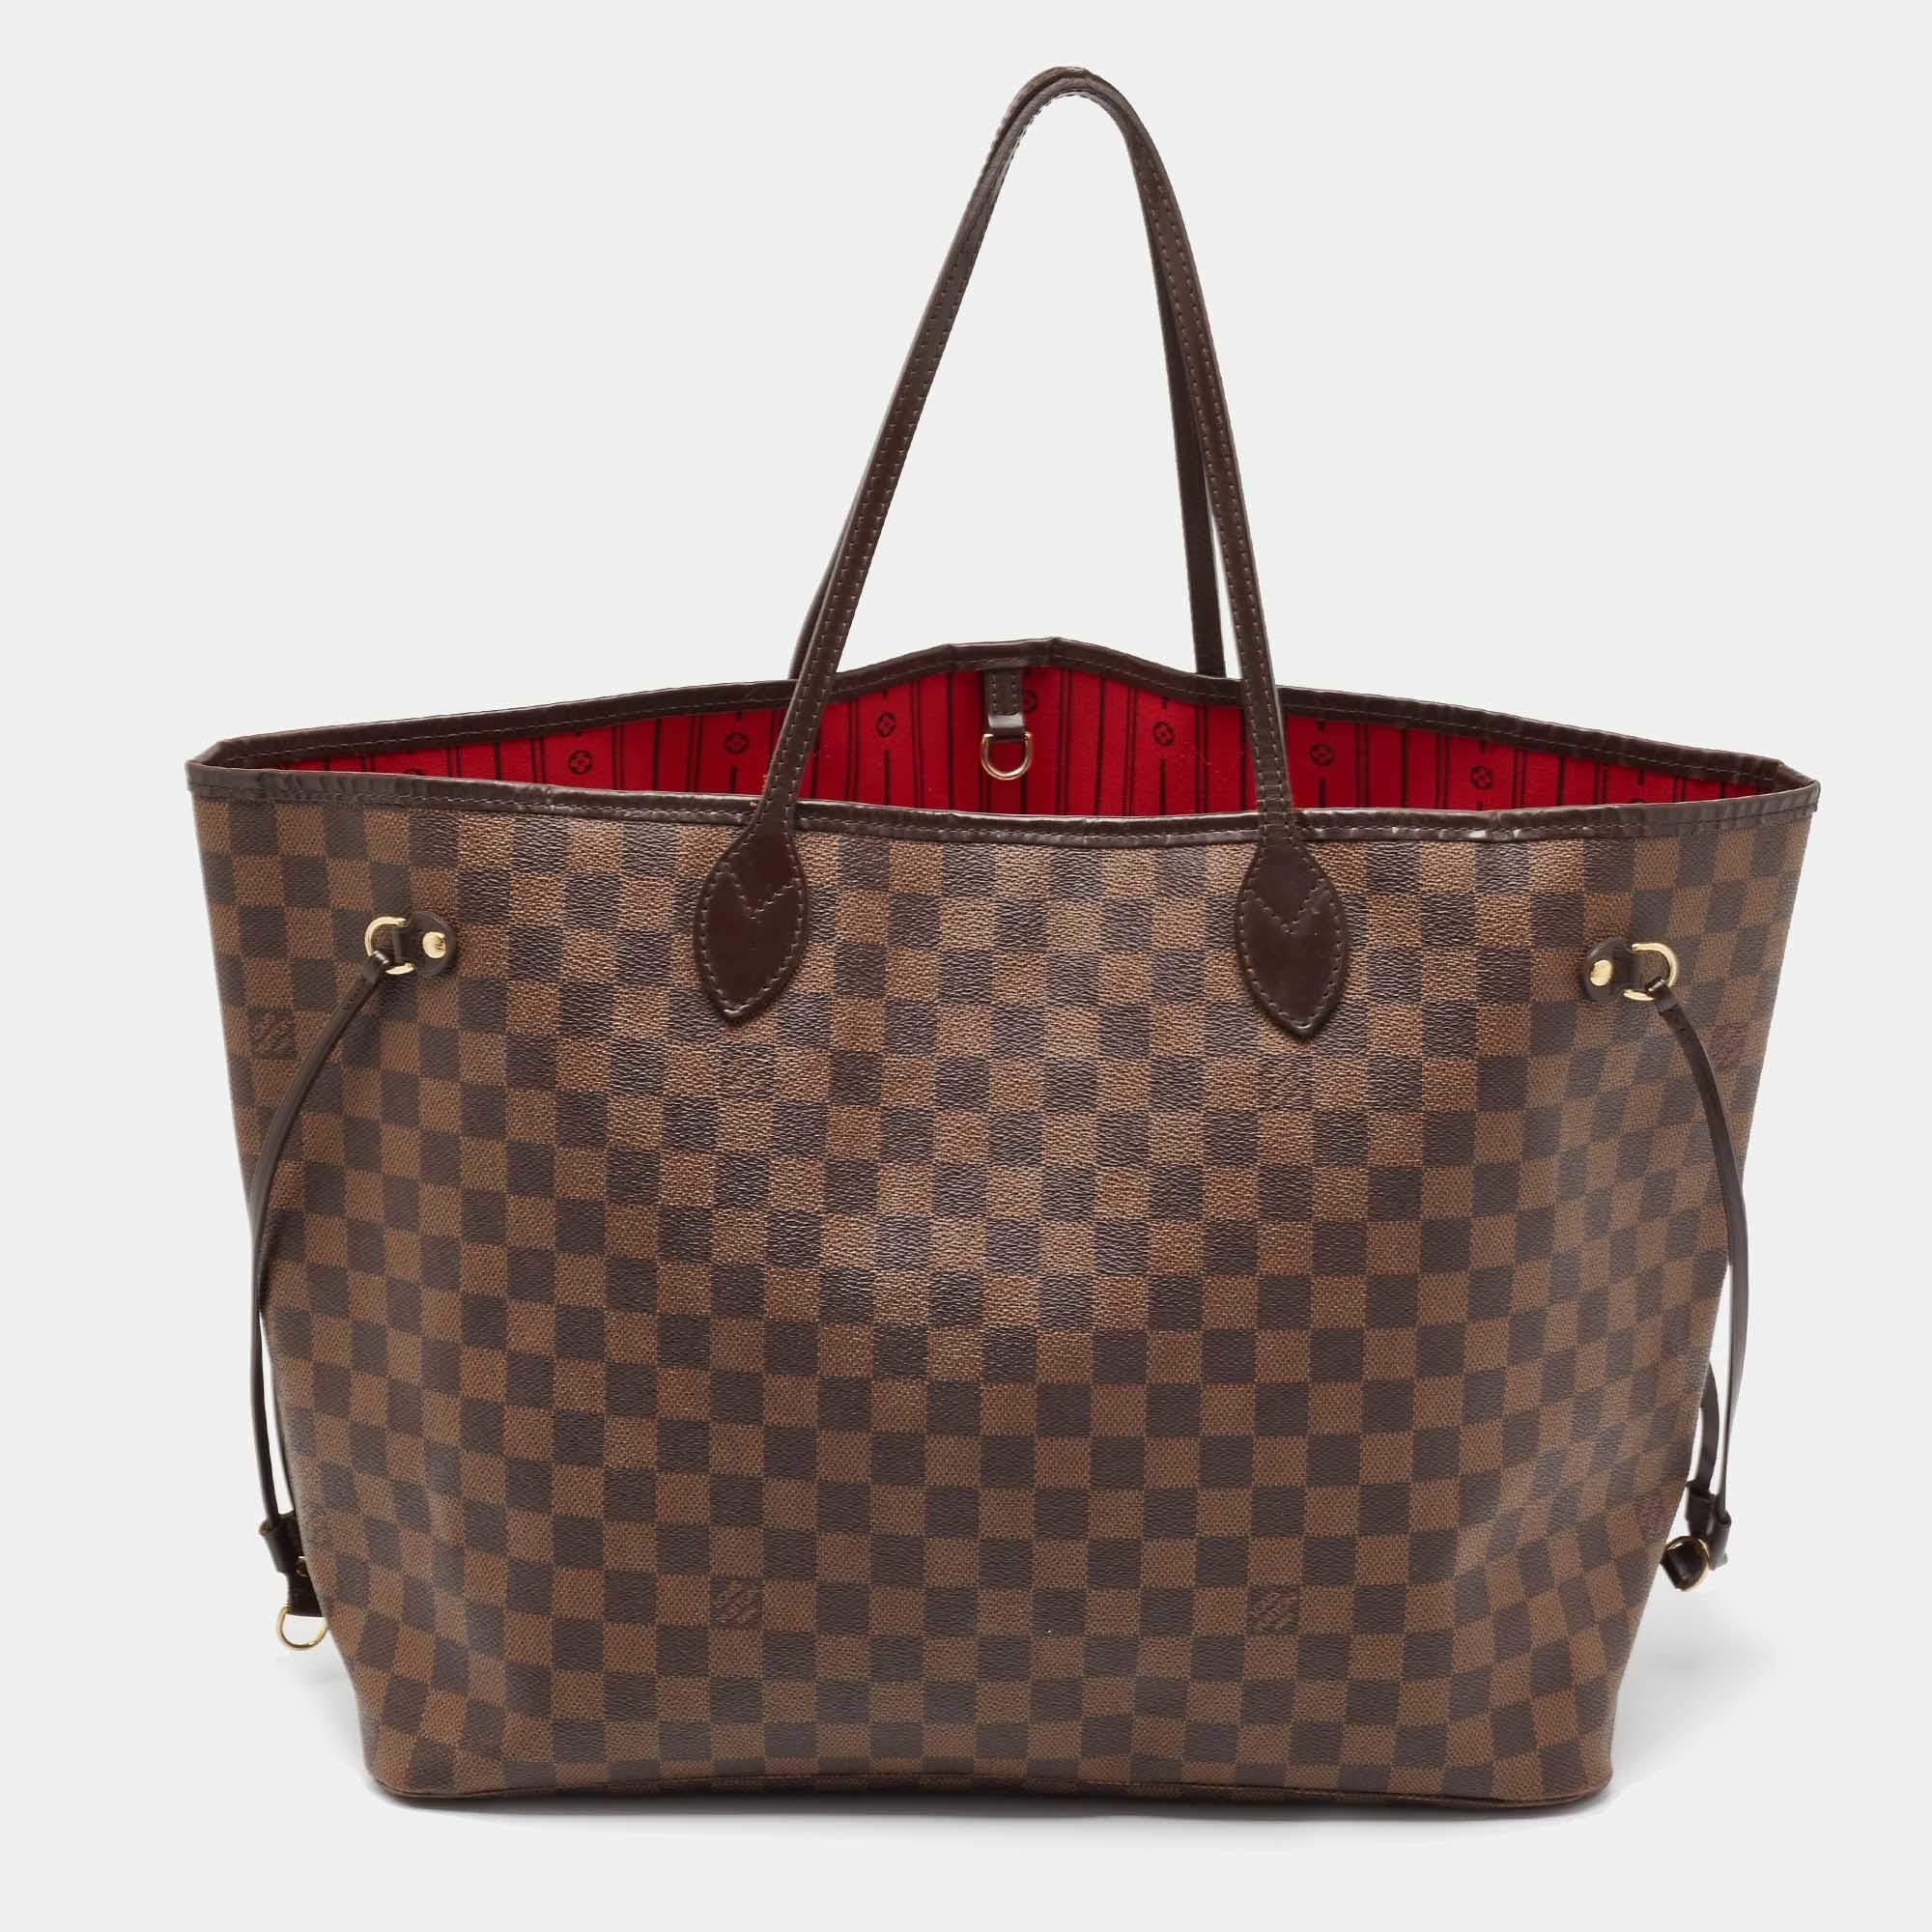 Louis Vuitton’s Neverfull was first introduced in 2007. Crafted from classic Damier Ebene canvas, Neverfull is versatile in design. The bag features dual top handles and a fabric-lined spacious interior. Neverfull is the perfect everyday tote.

